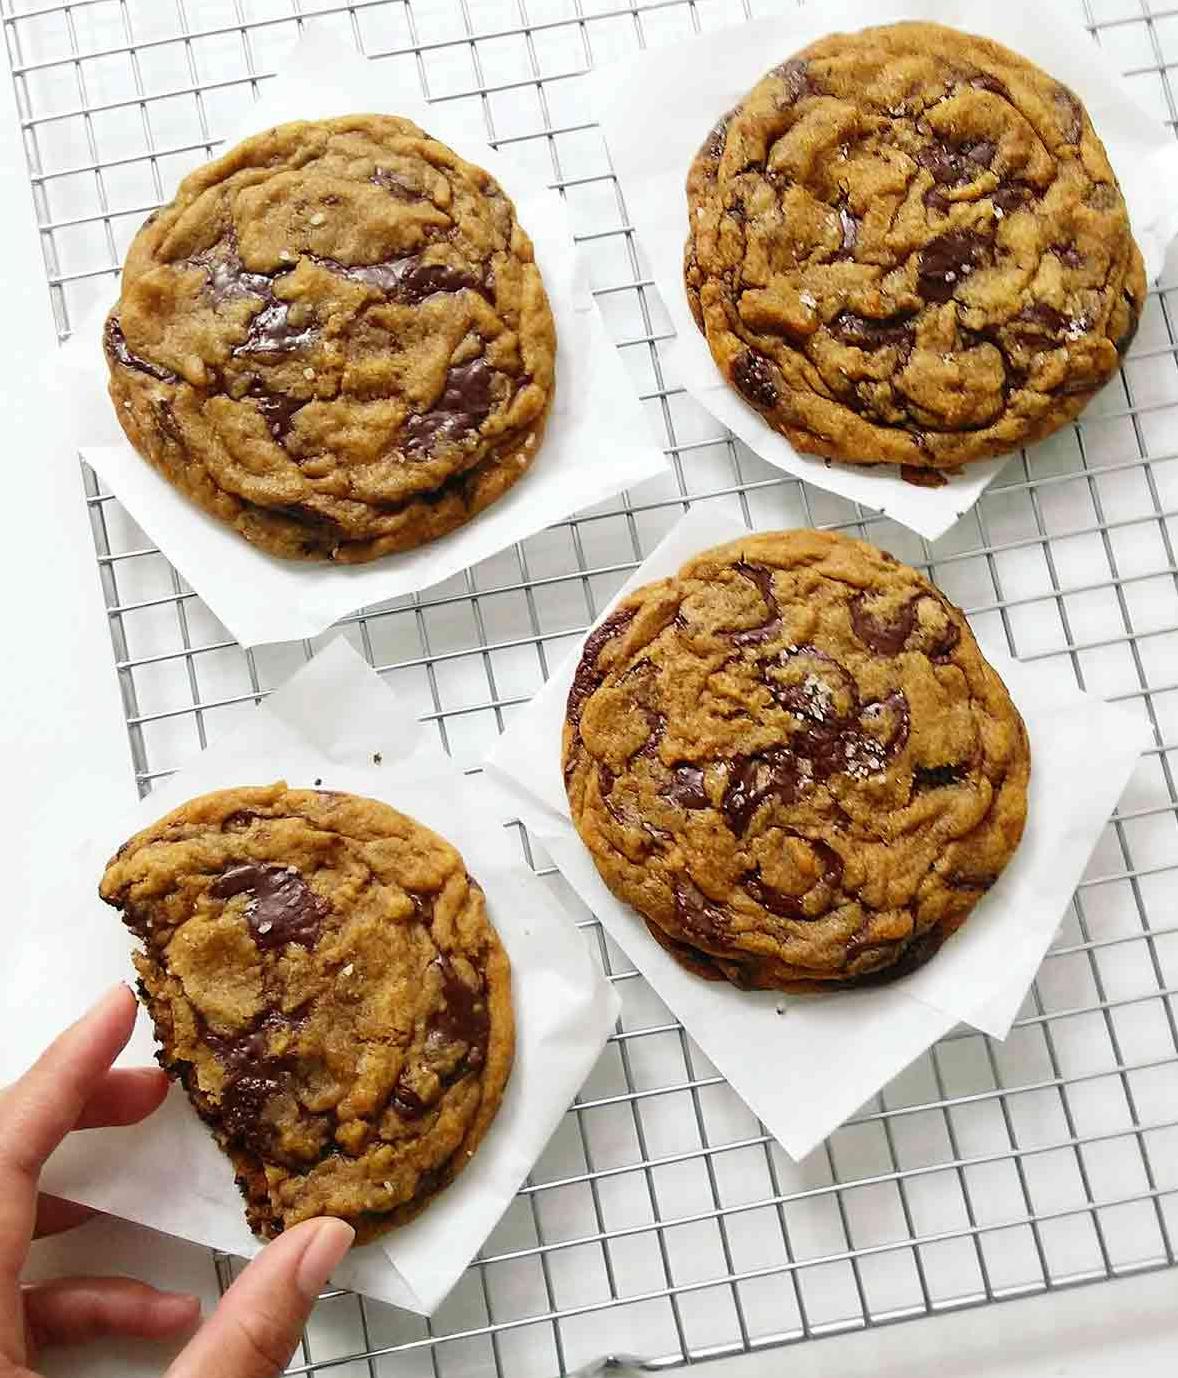  No wheat? No problem! These cookies are gluten-free and delicious